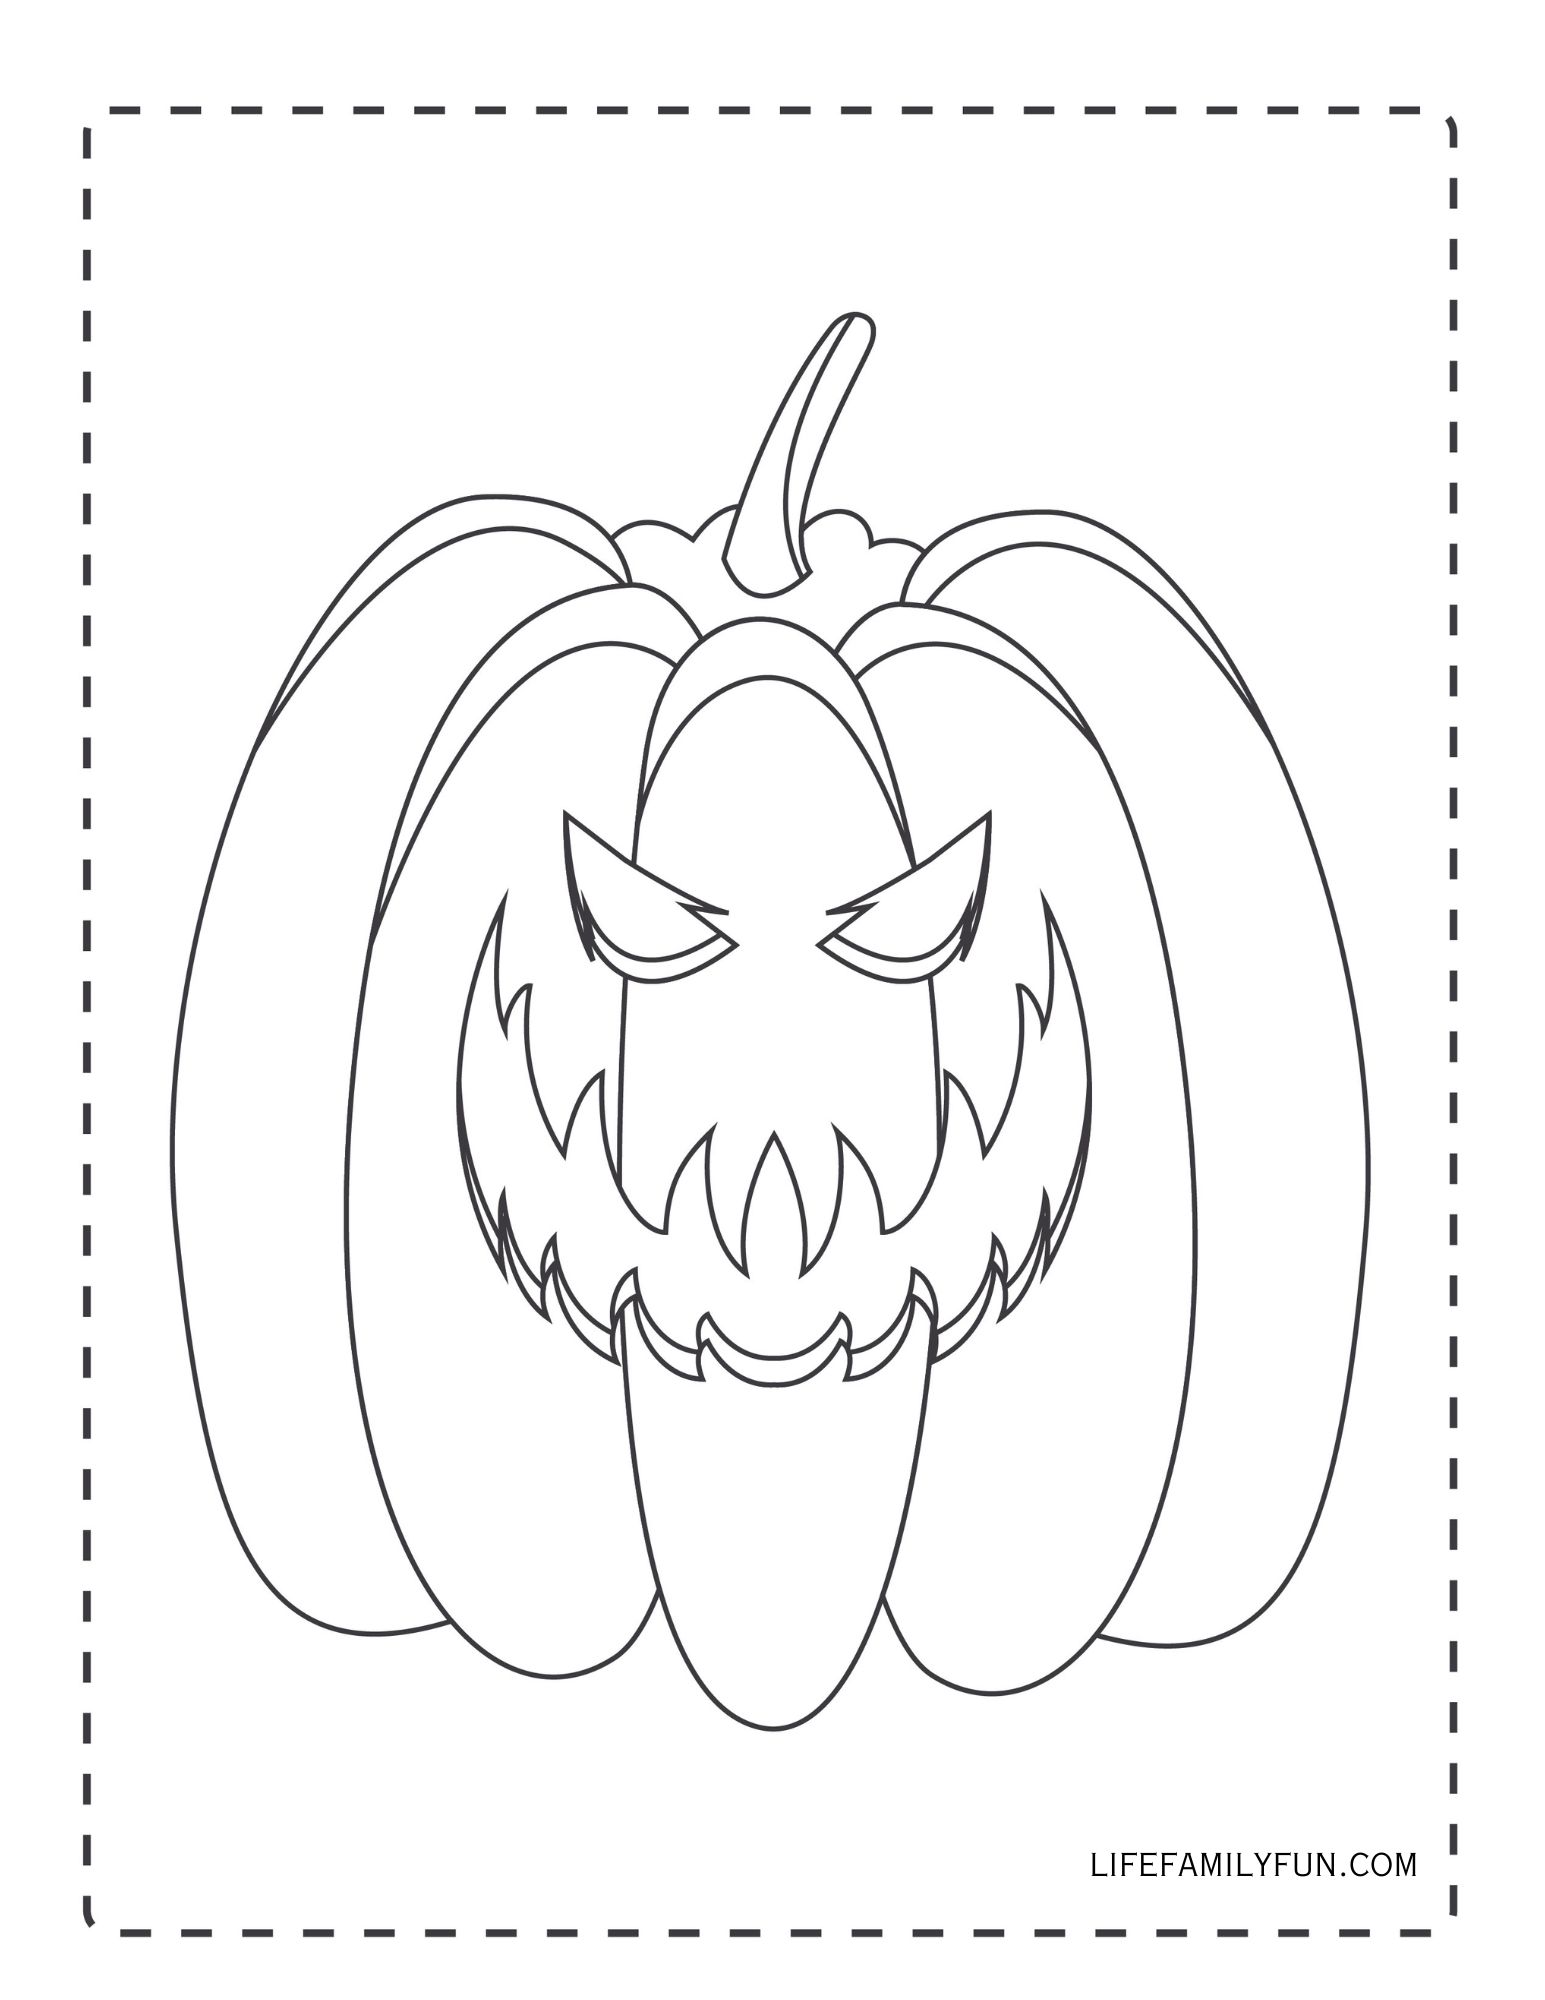 Scary Halloween Pumpkin Coloring Page